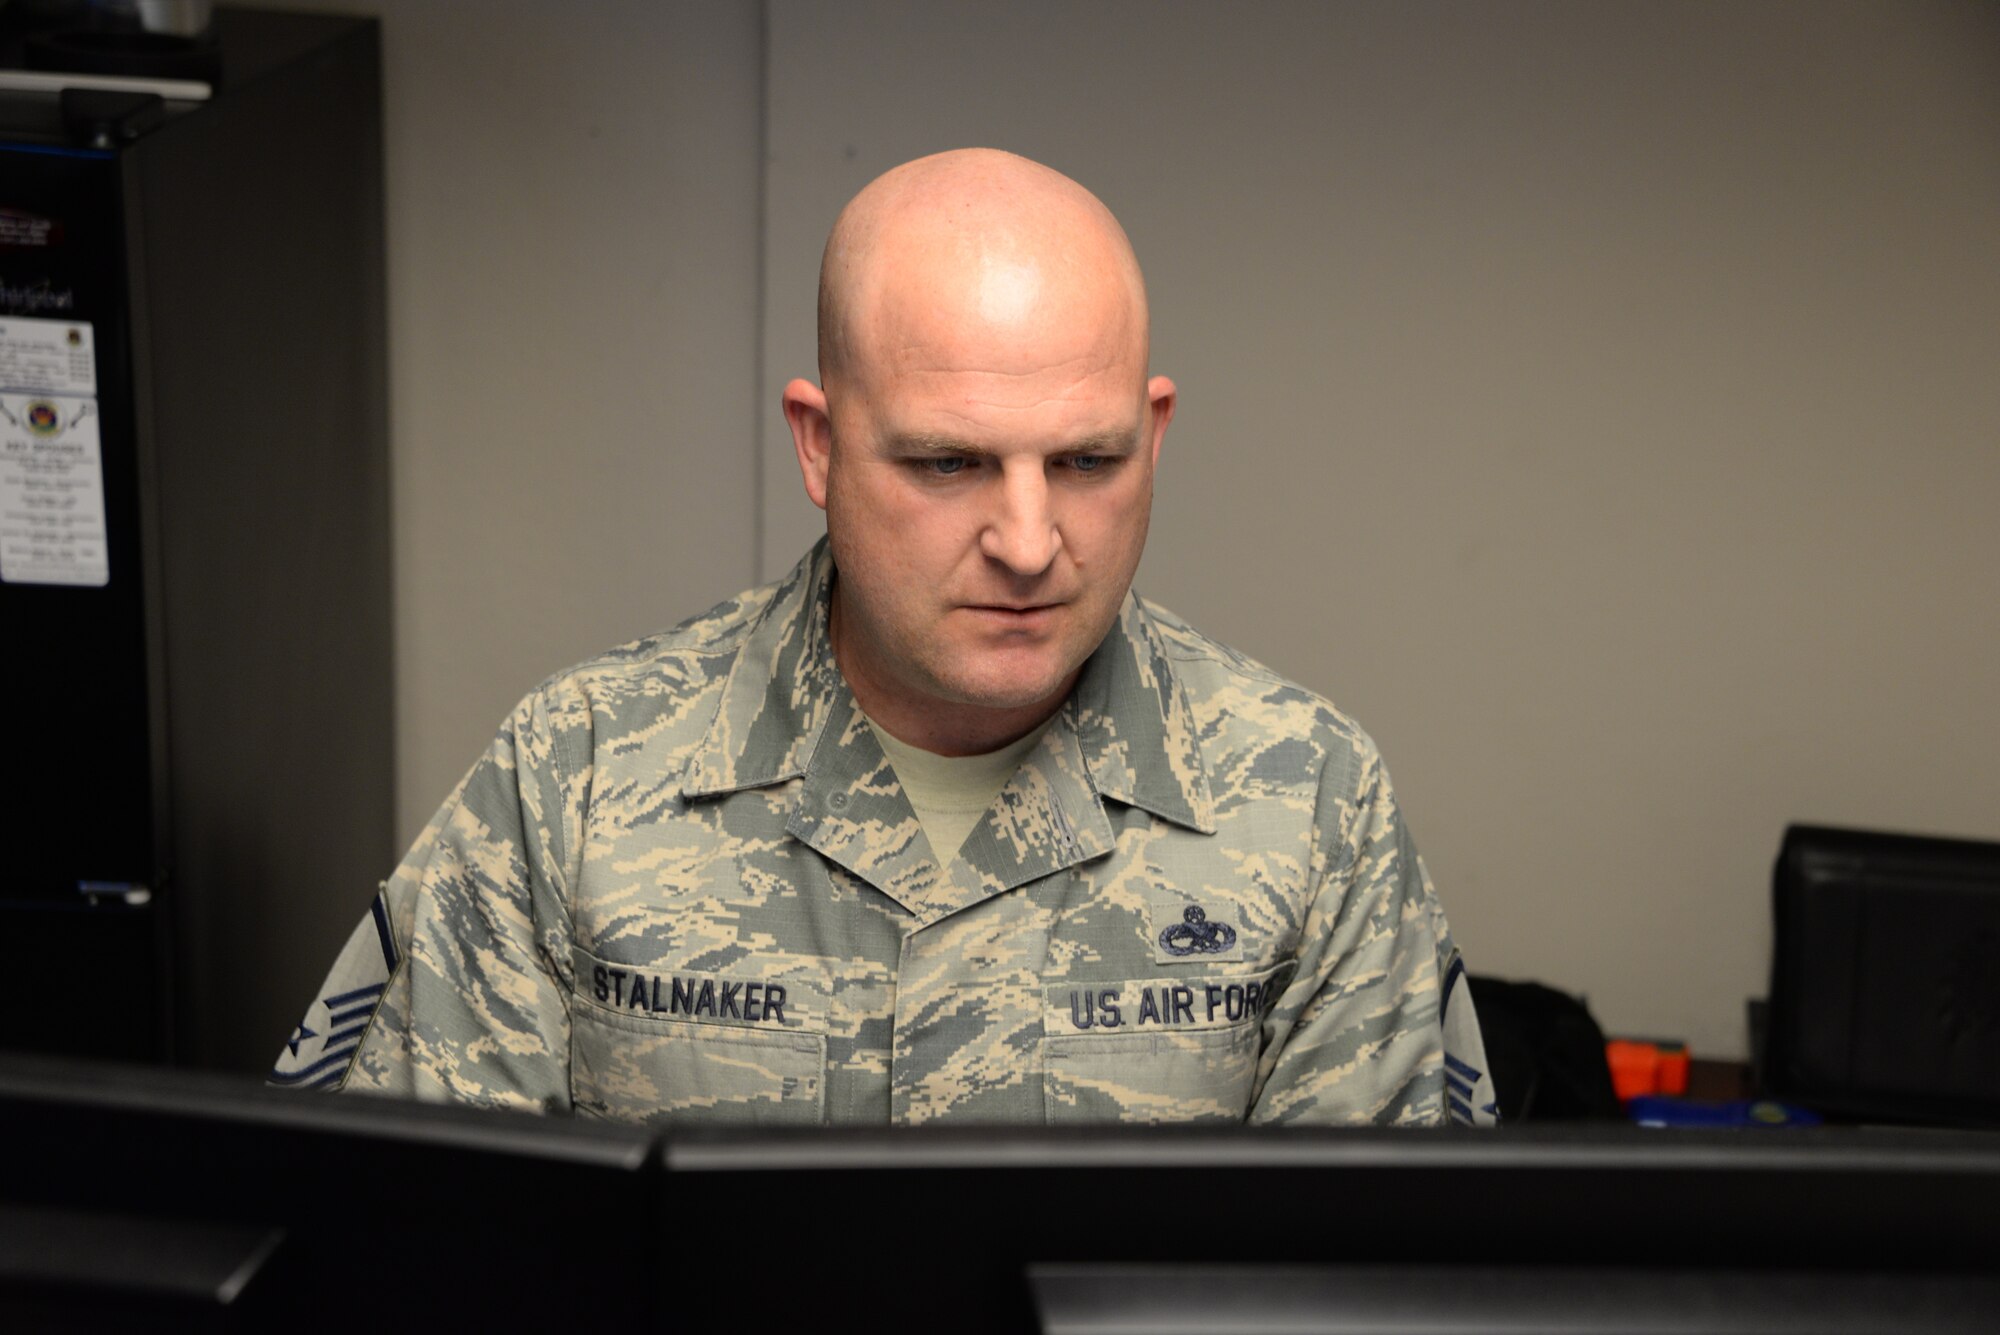 Master Sgt. James Stalnaker, 60th Maintenance Squadron, works at his desk at Travis Air Force Base, Calif., March 20, 2017.